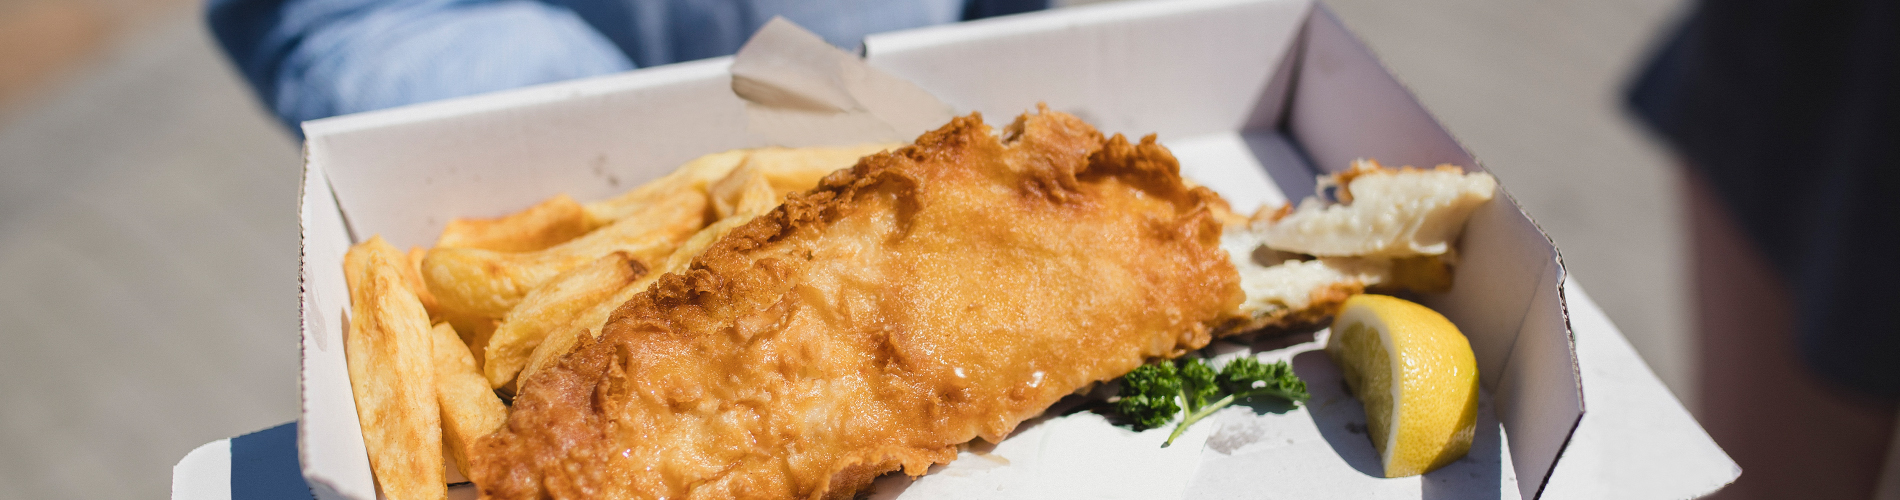 Fish and Chips 1900x500